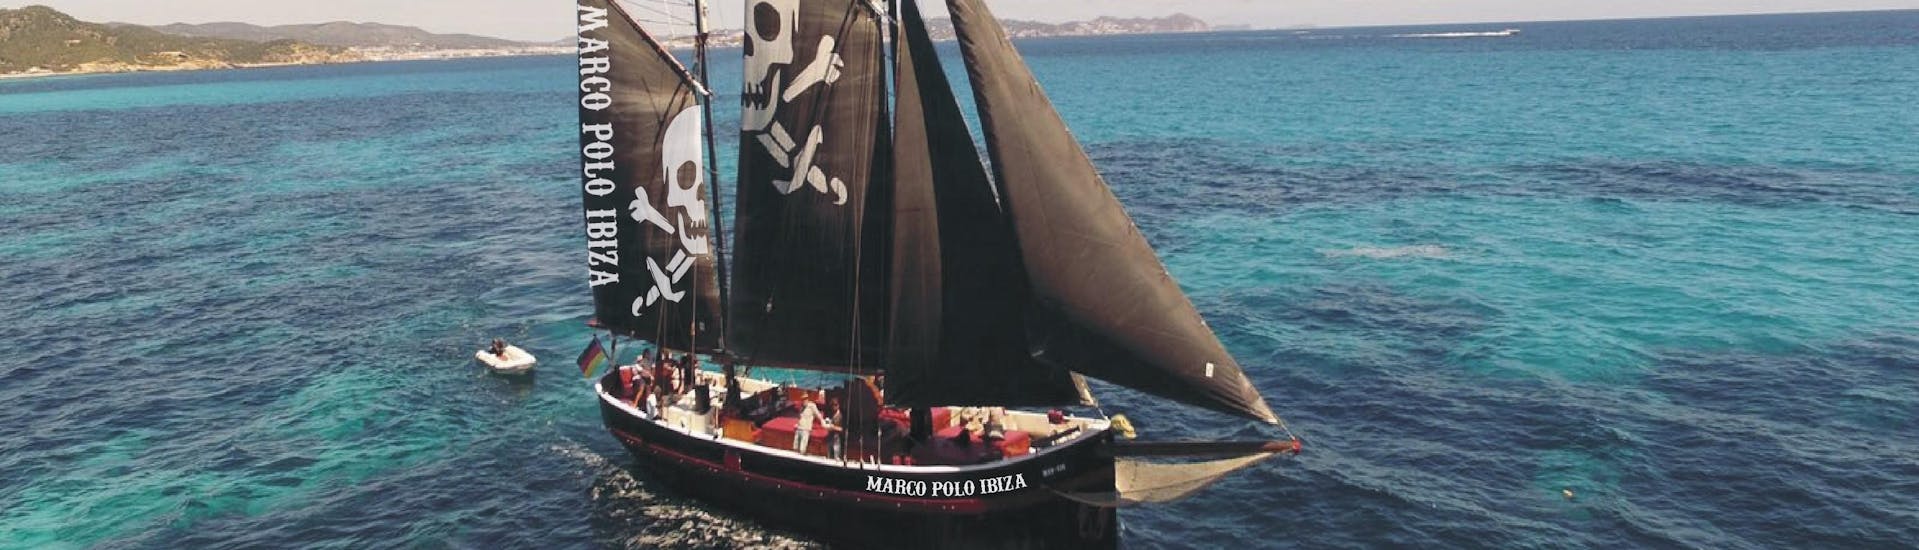 Our pirate boat is sailing during one of our boat trip with Marco Polo Ibiza.